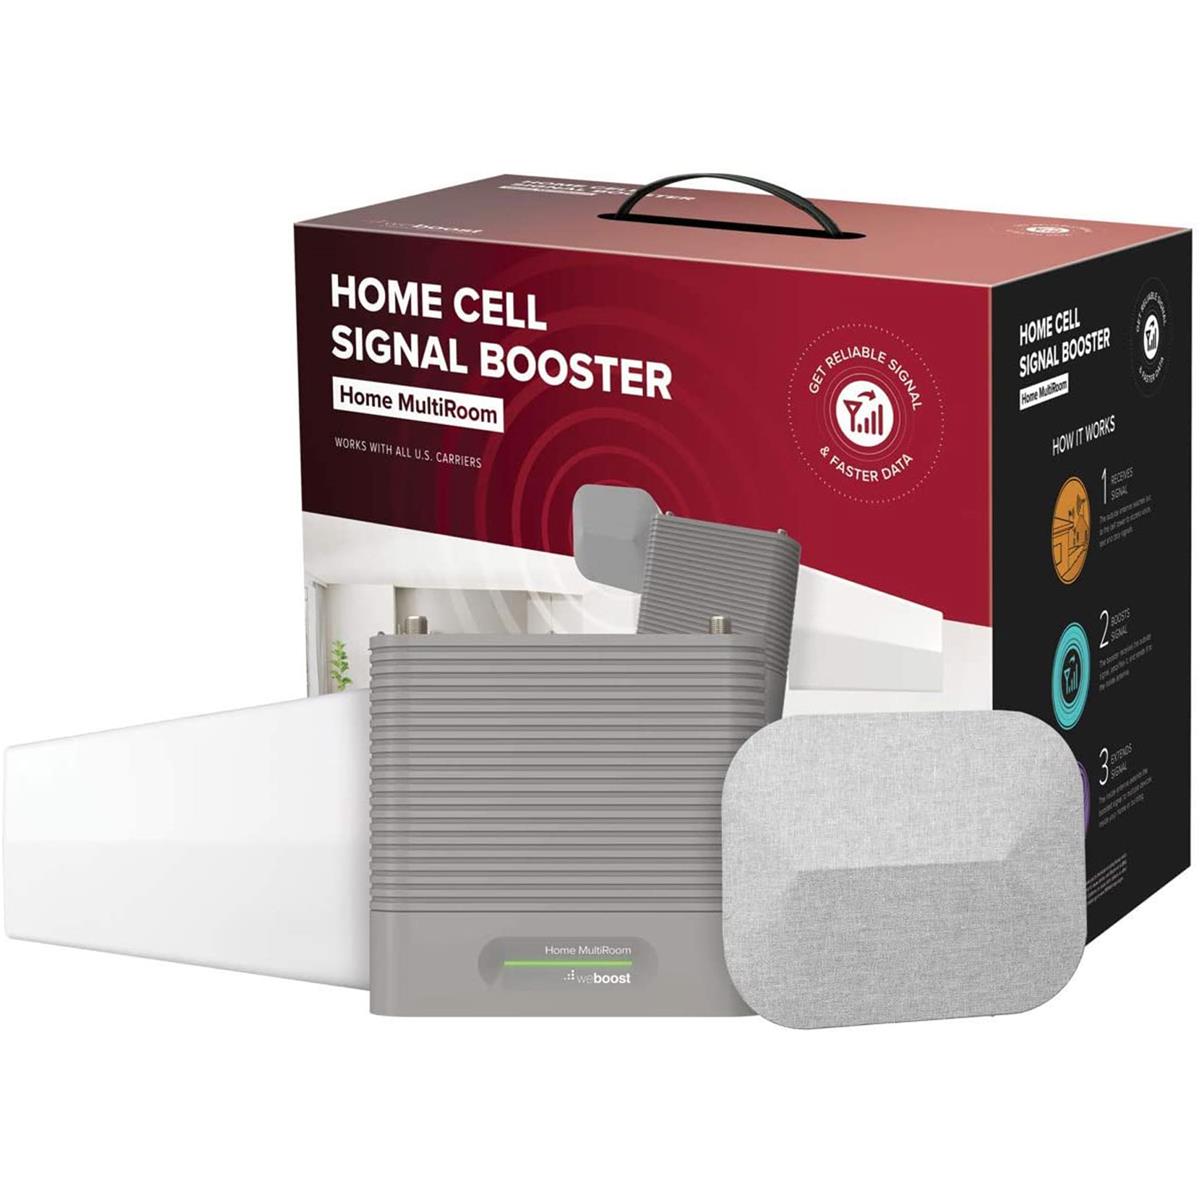 Image of WebRC weBoost Home MultiRoom Cell Phone Signal Booster